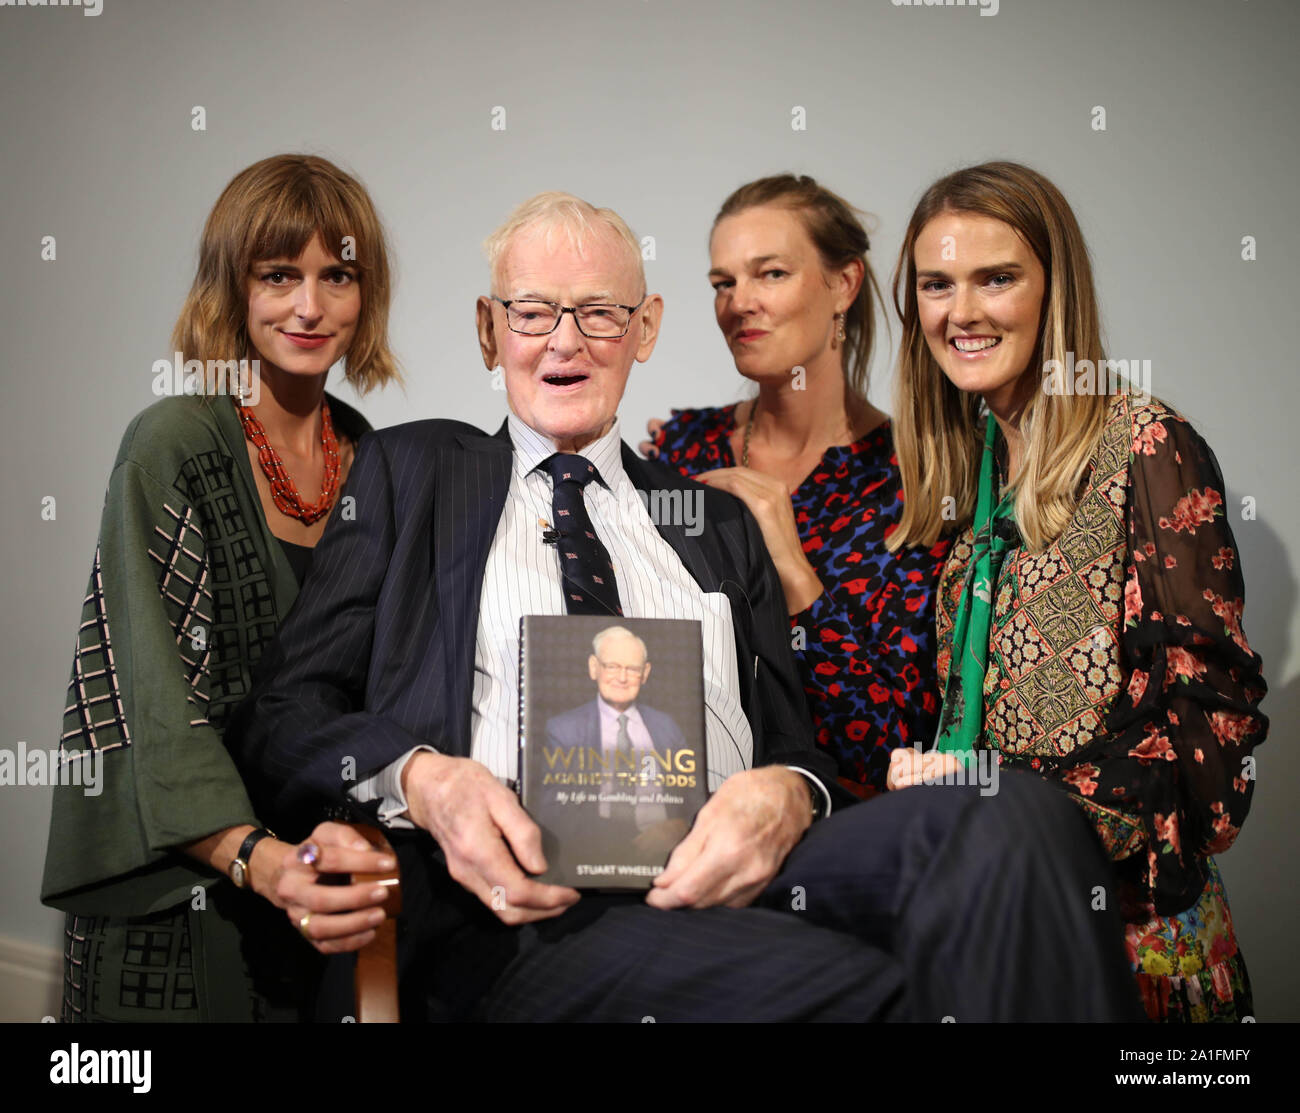 Stuart Wheeler, holding his book, and his three daughters, model Jacquetta Wheeler, 37 (left), Sarah Wheeler (centre) and Charlotte Wheeler (right) at the book launch of My Life in Gambling and Politics by Stuart Wheeler at Carlton House Terrace, London. Stock Photo